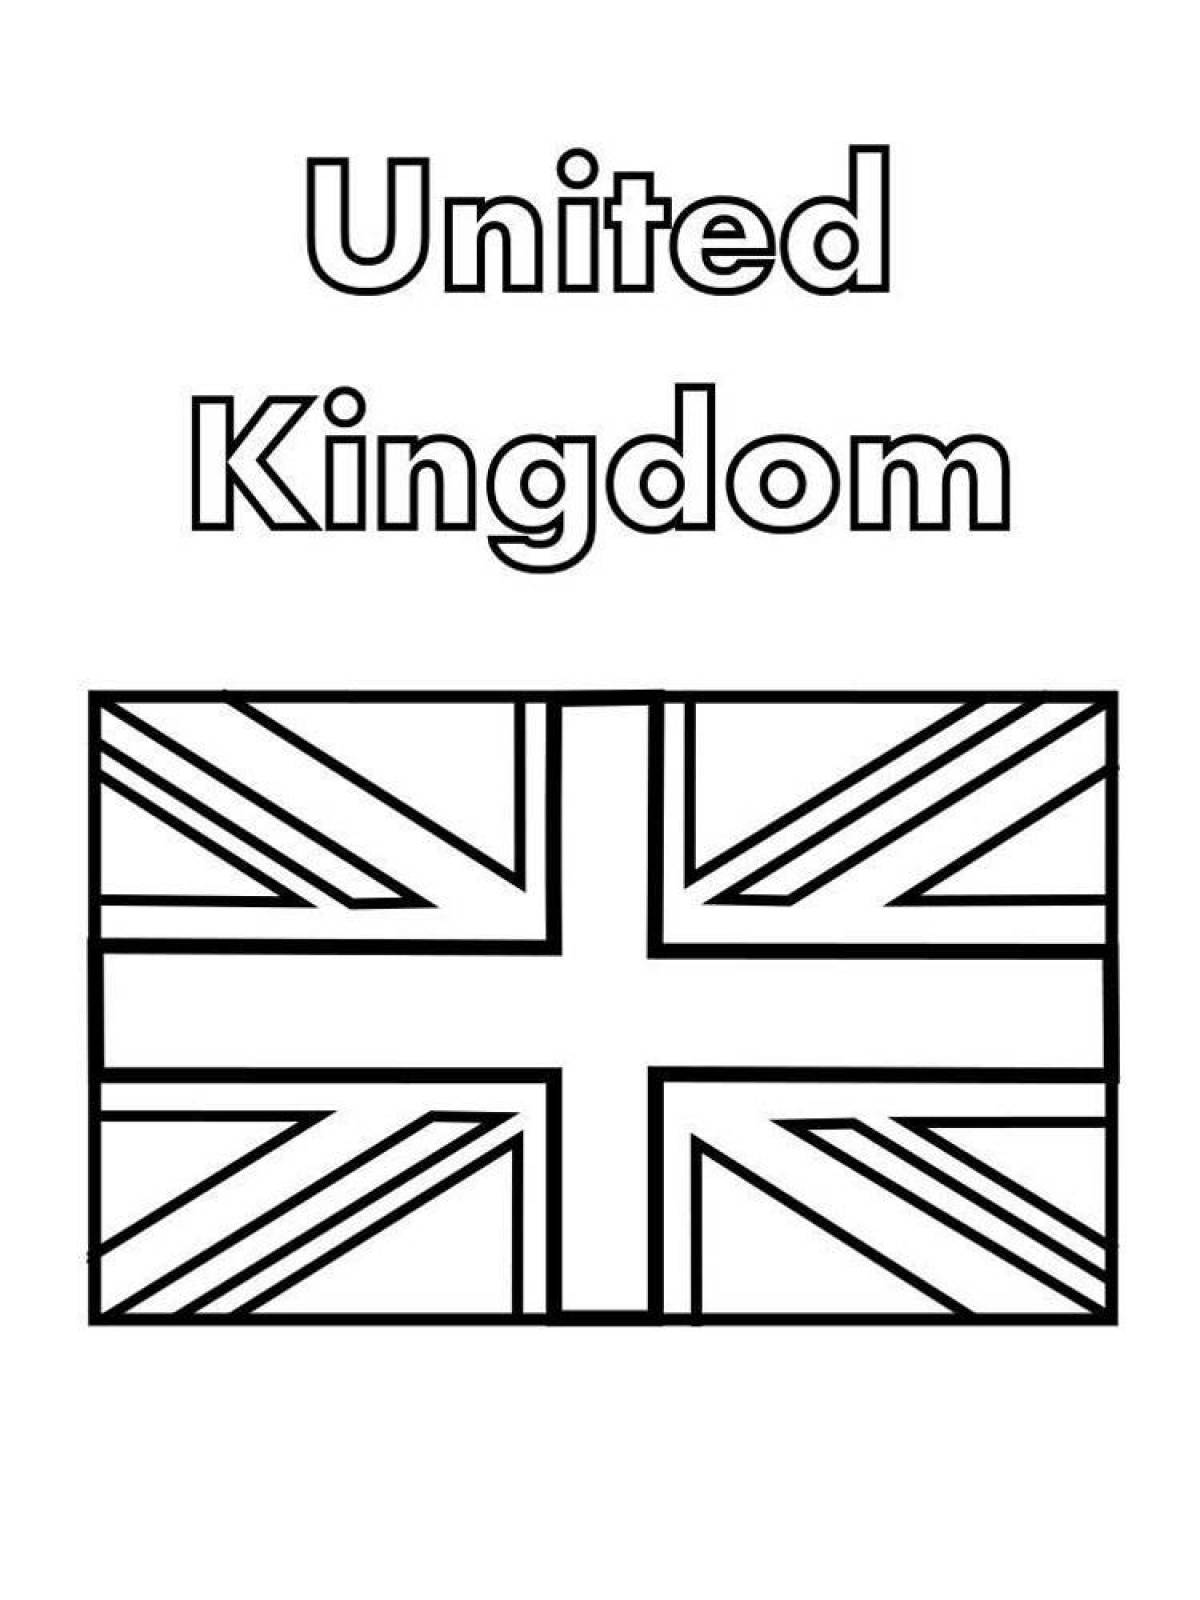 Exquisite UK flag coloring page